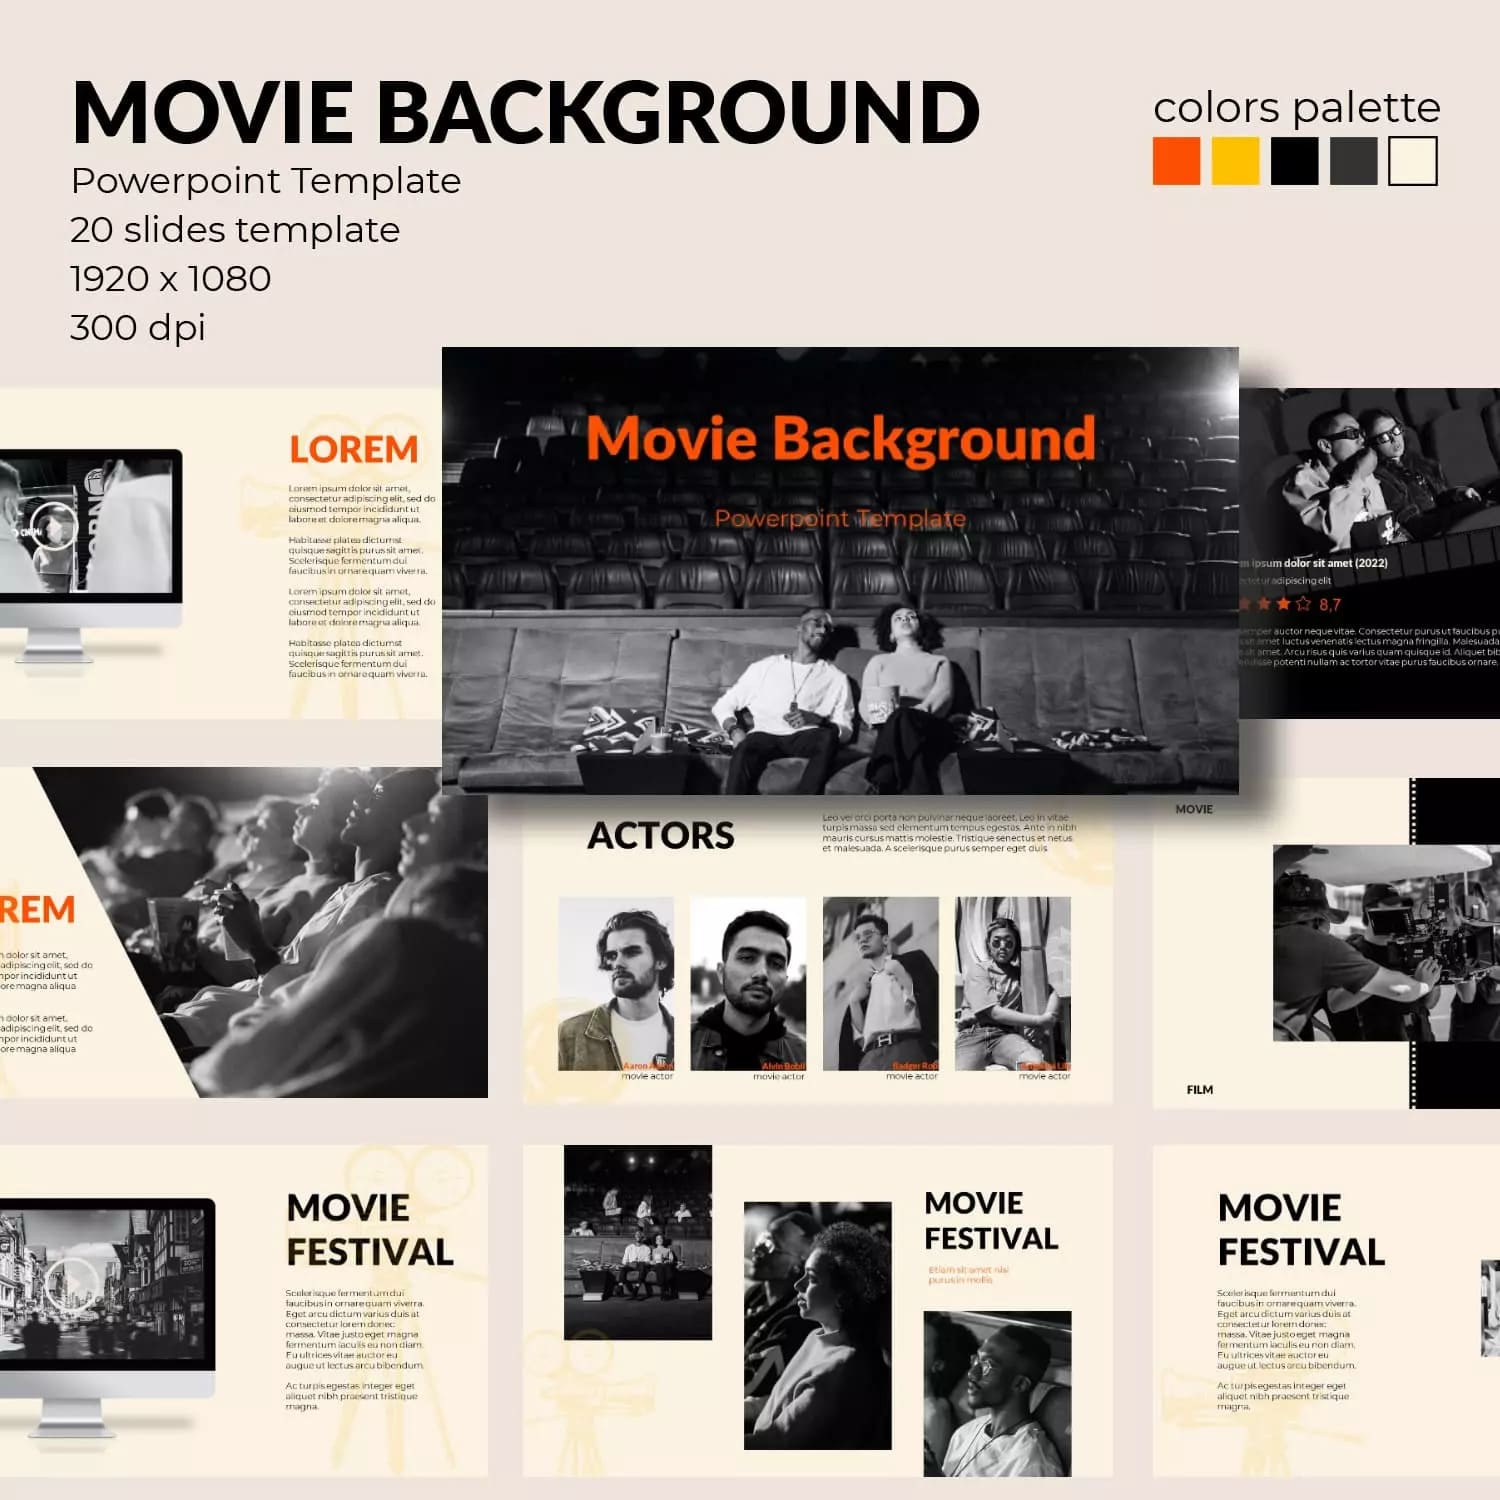 Movie Background Powerpoint Template Preview image.